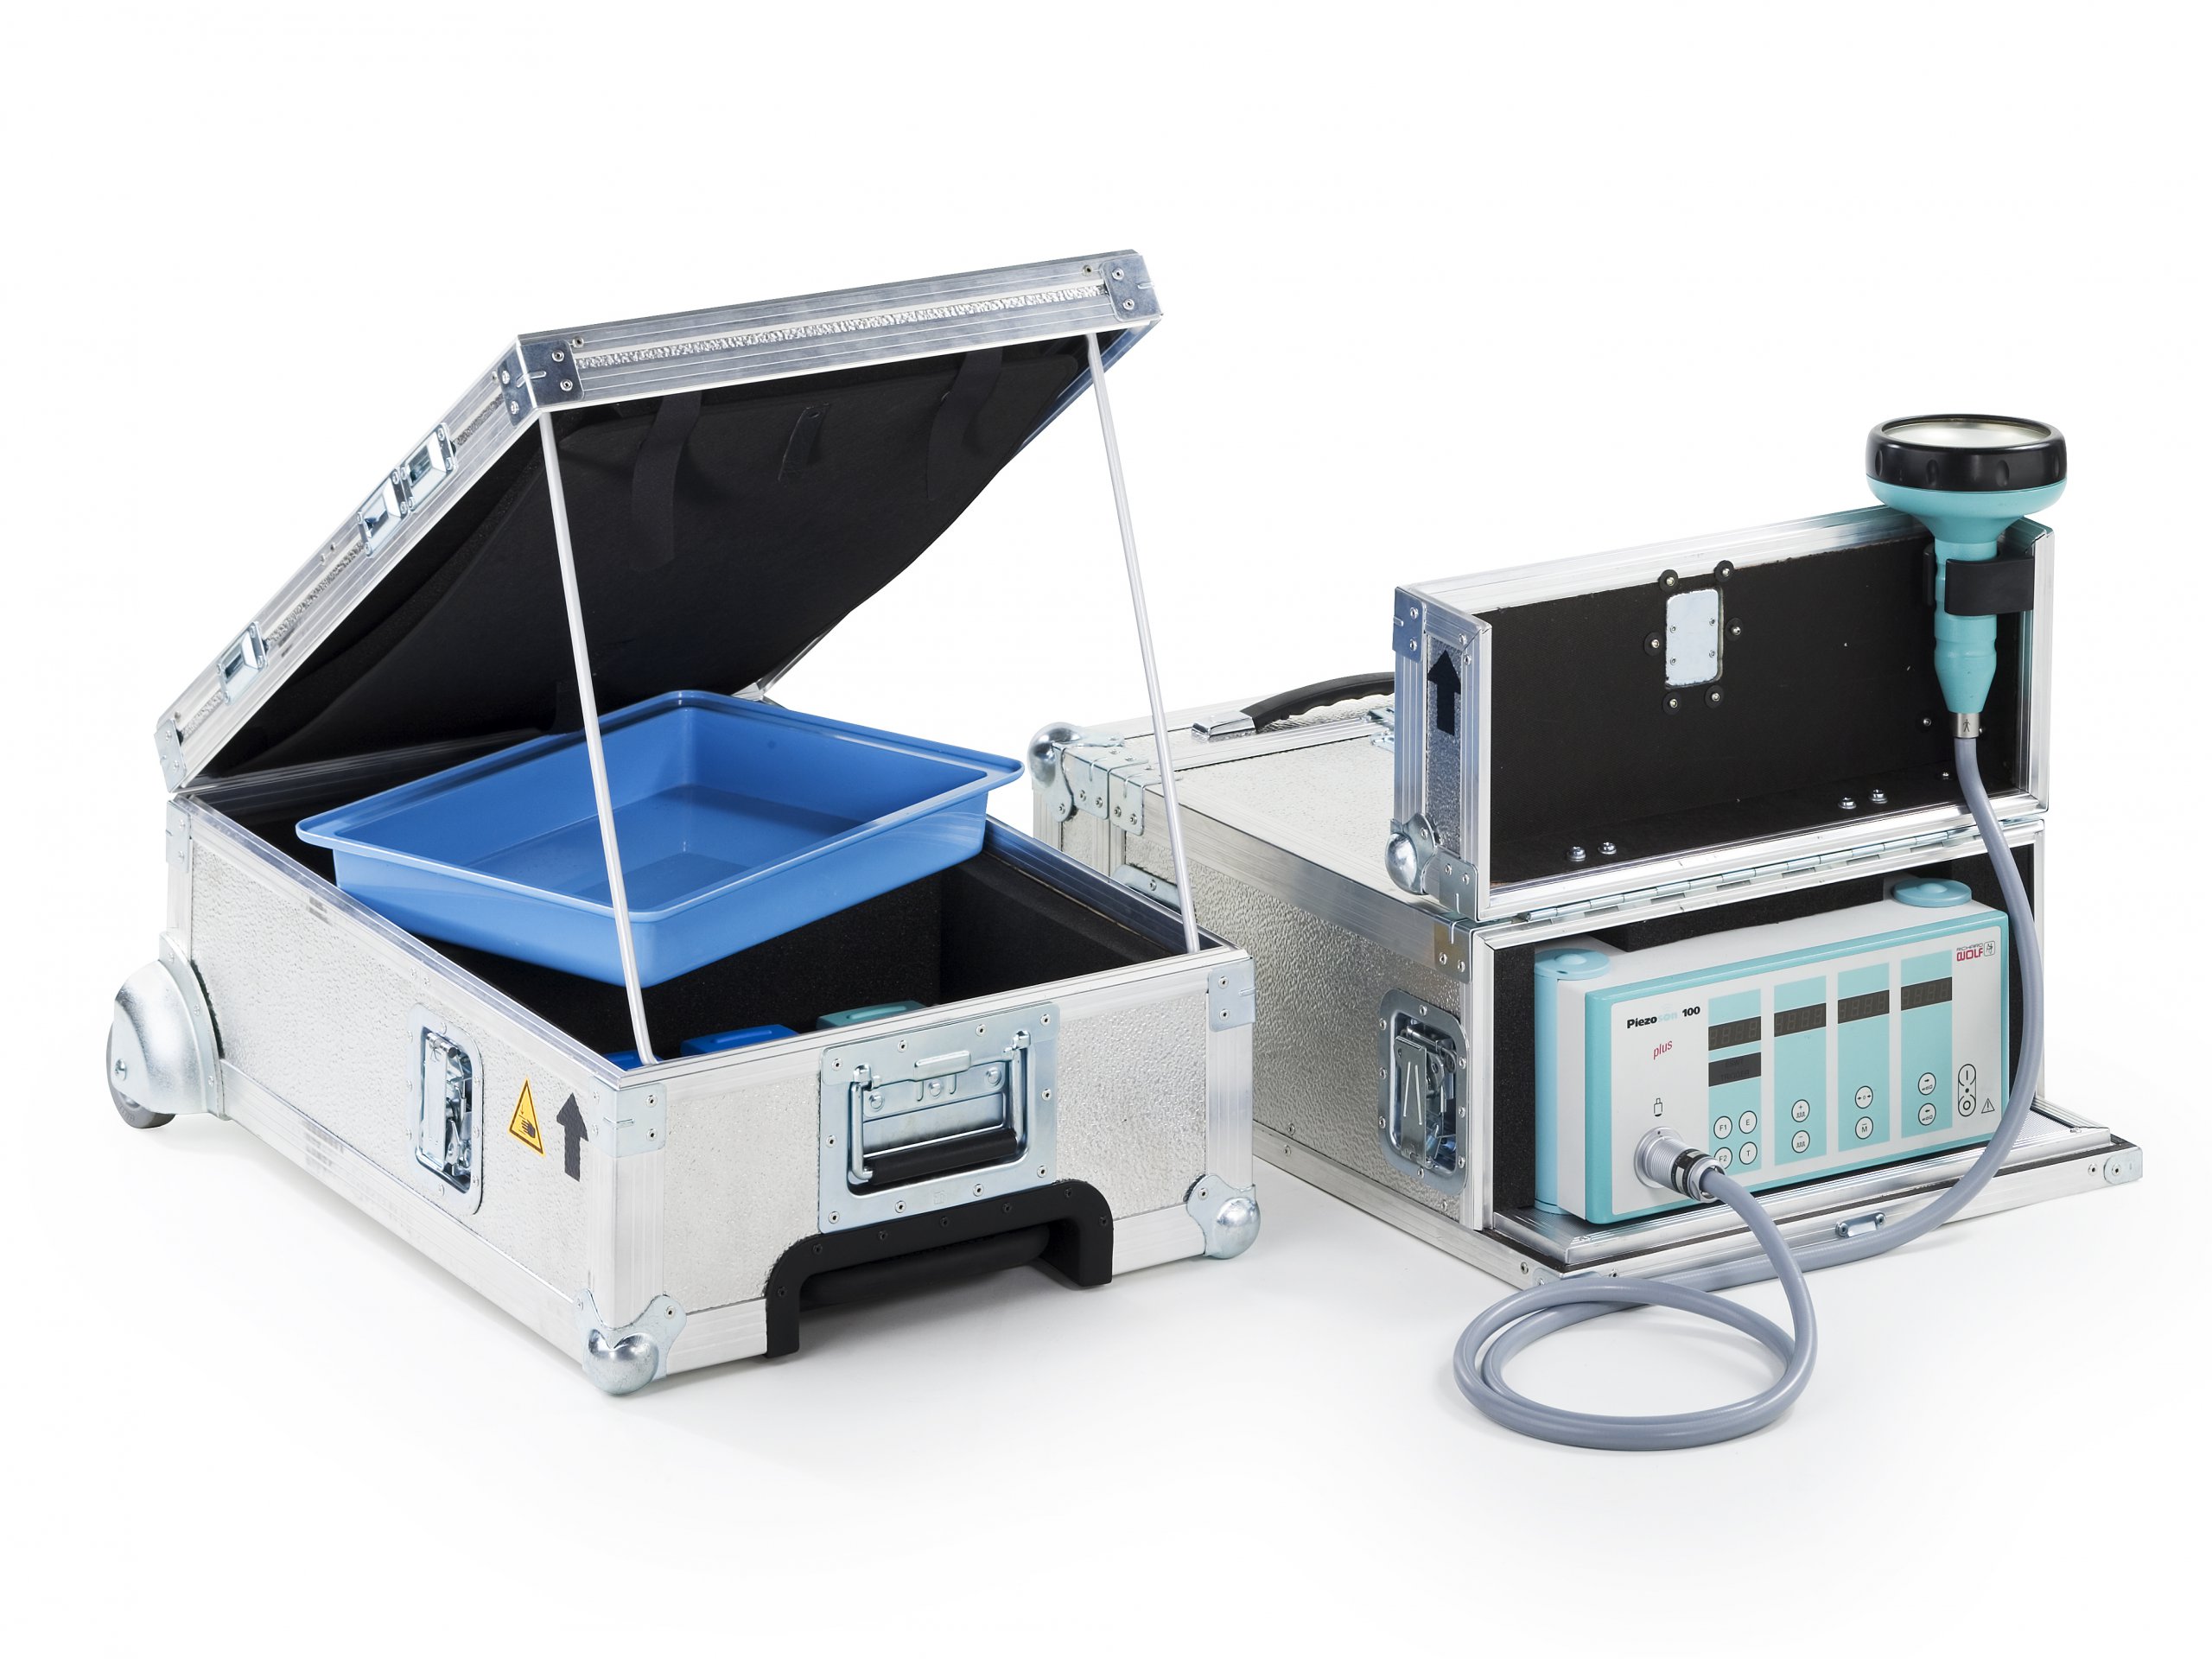 Equipment integration in a case - bwh Koffer